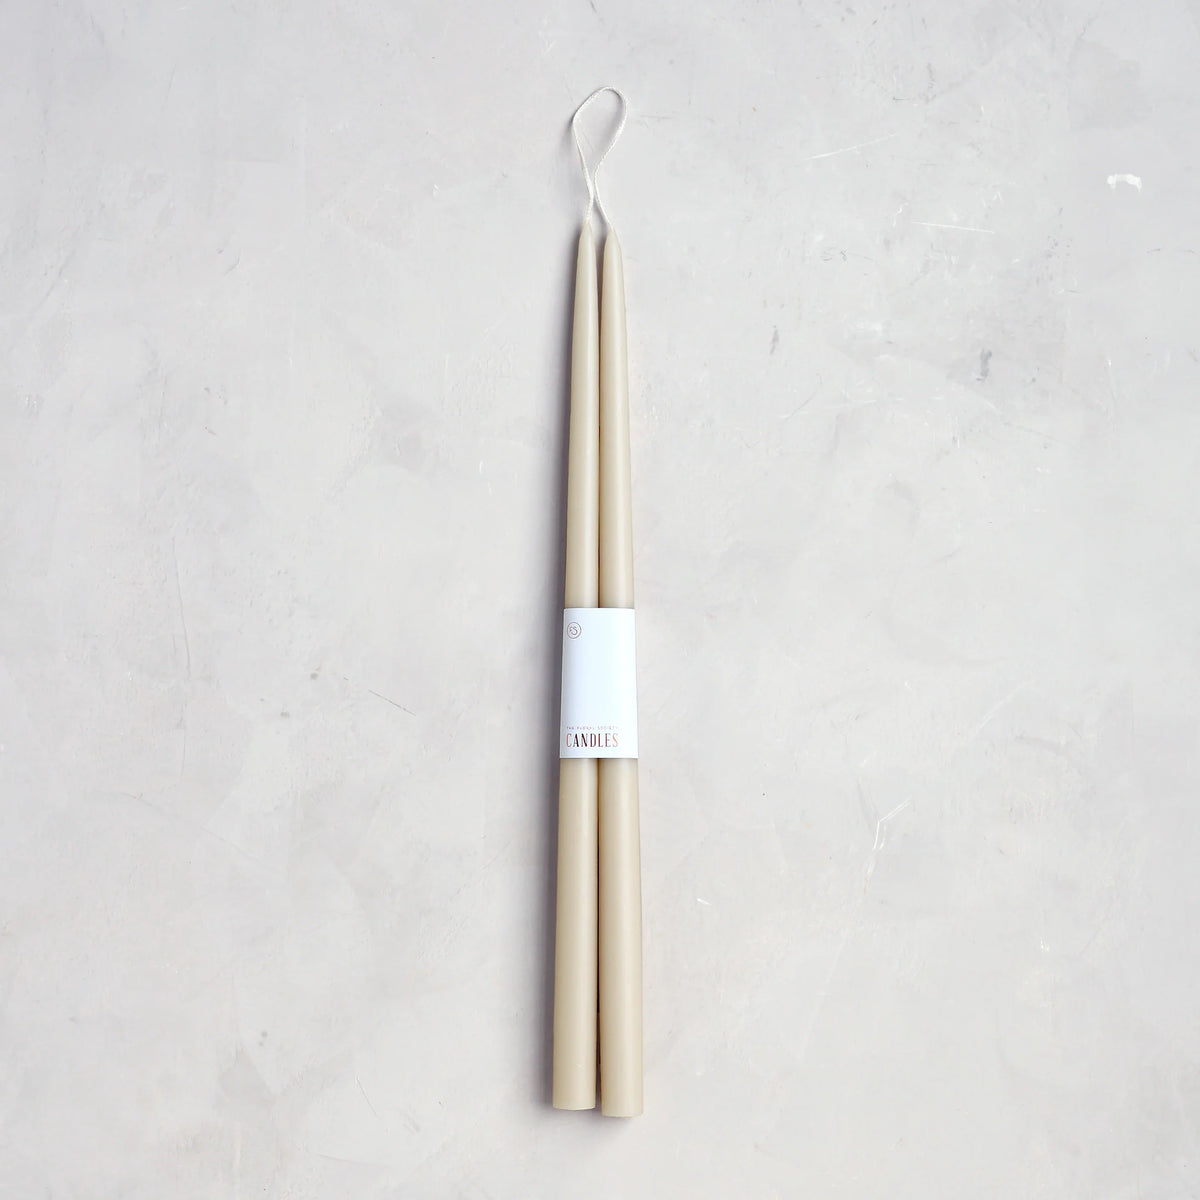 Parchment Taper Candles, Set of 2